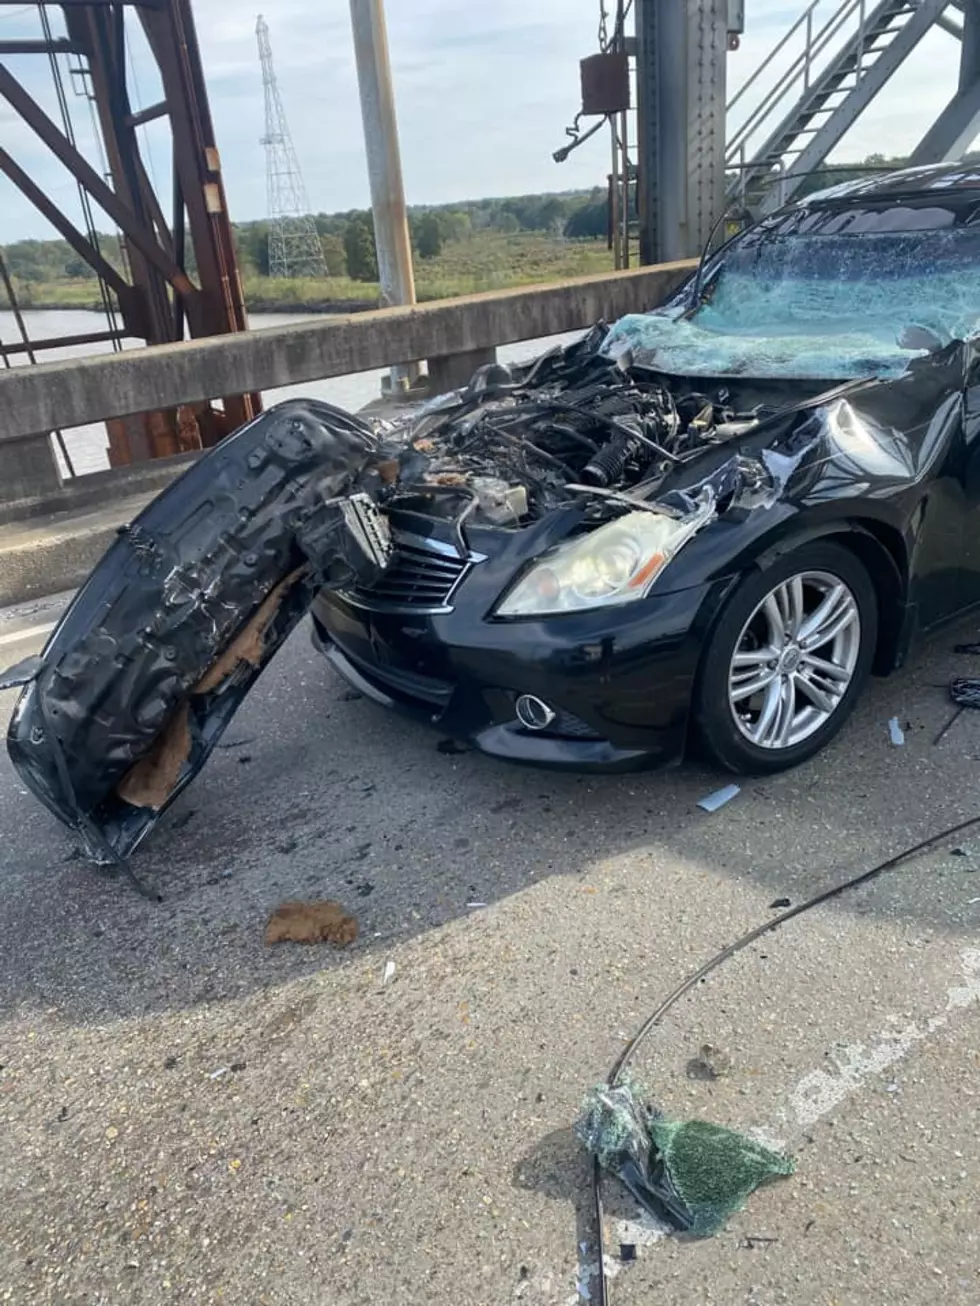 Cable on Belle Chasse Bridge Falls and Hits Vehicle